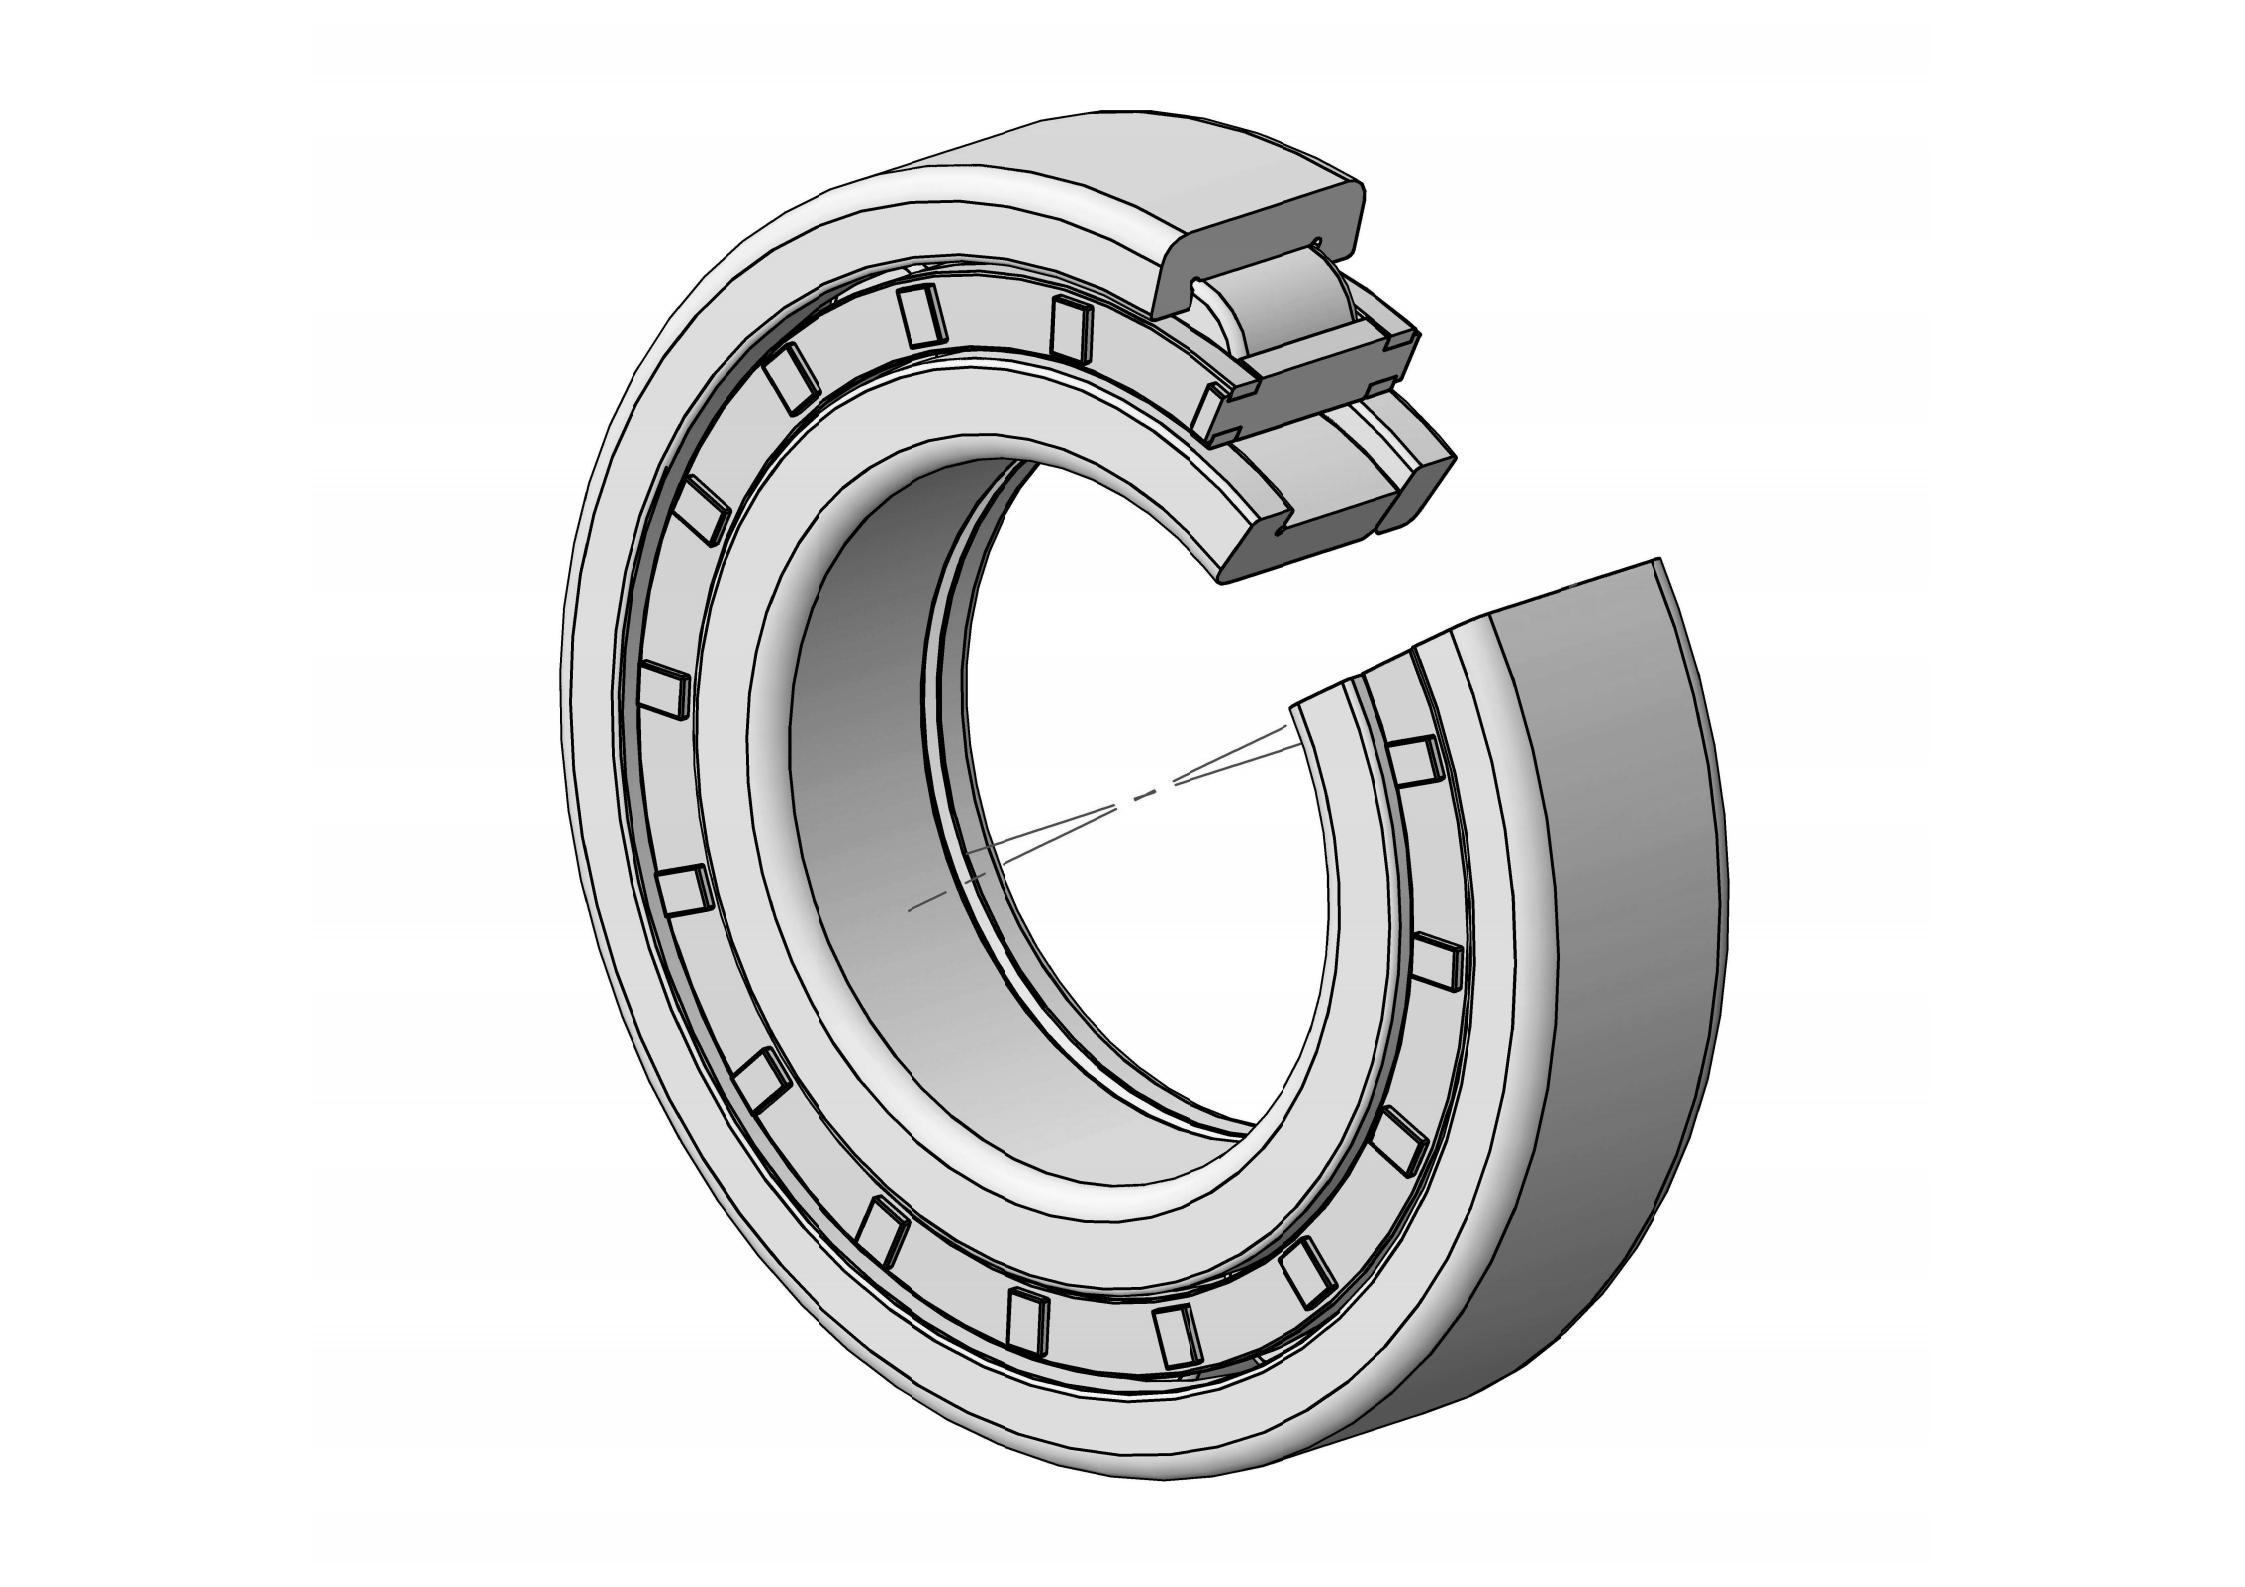 NUP2308-E Single Row Cylindrical roller bearing 